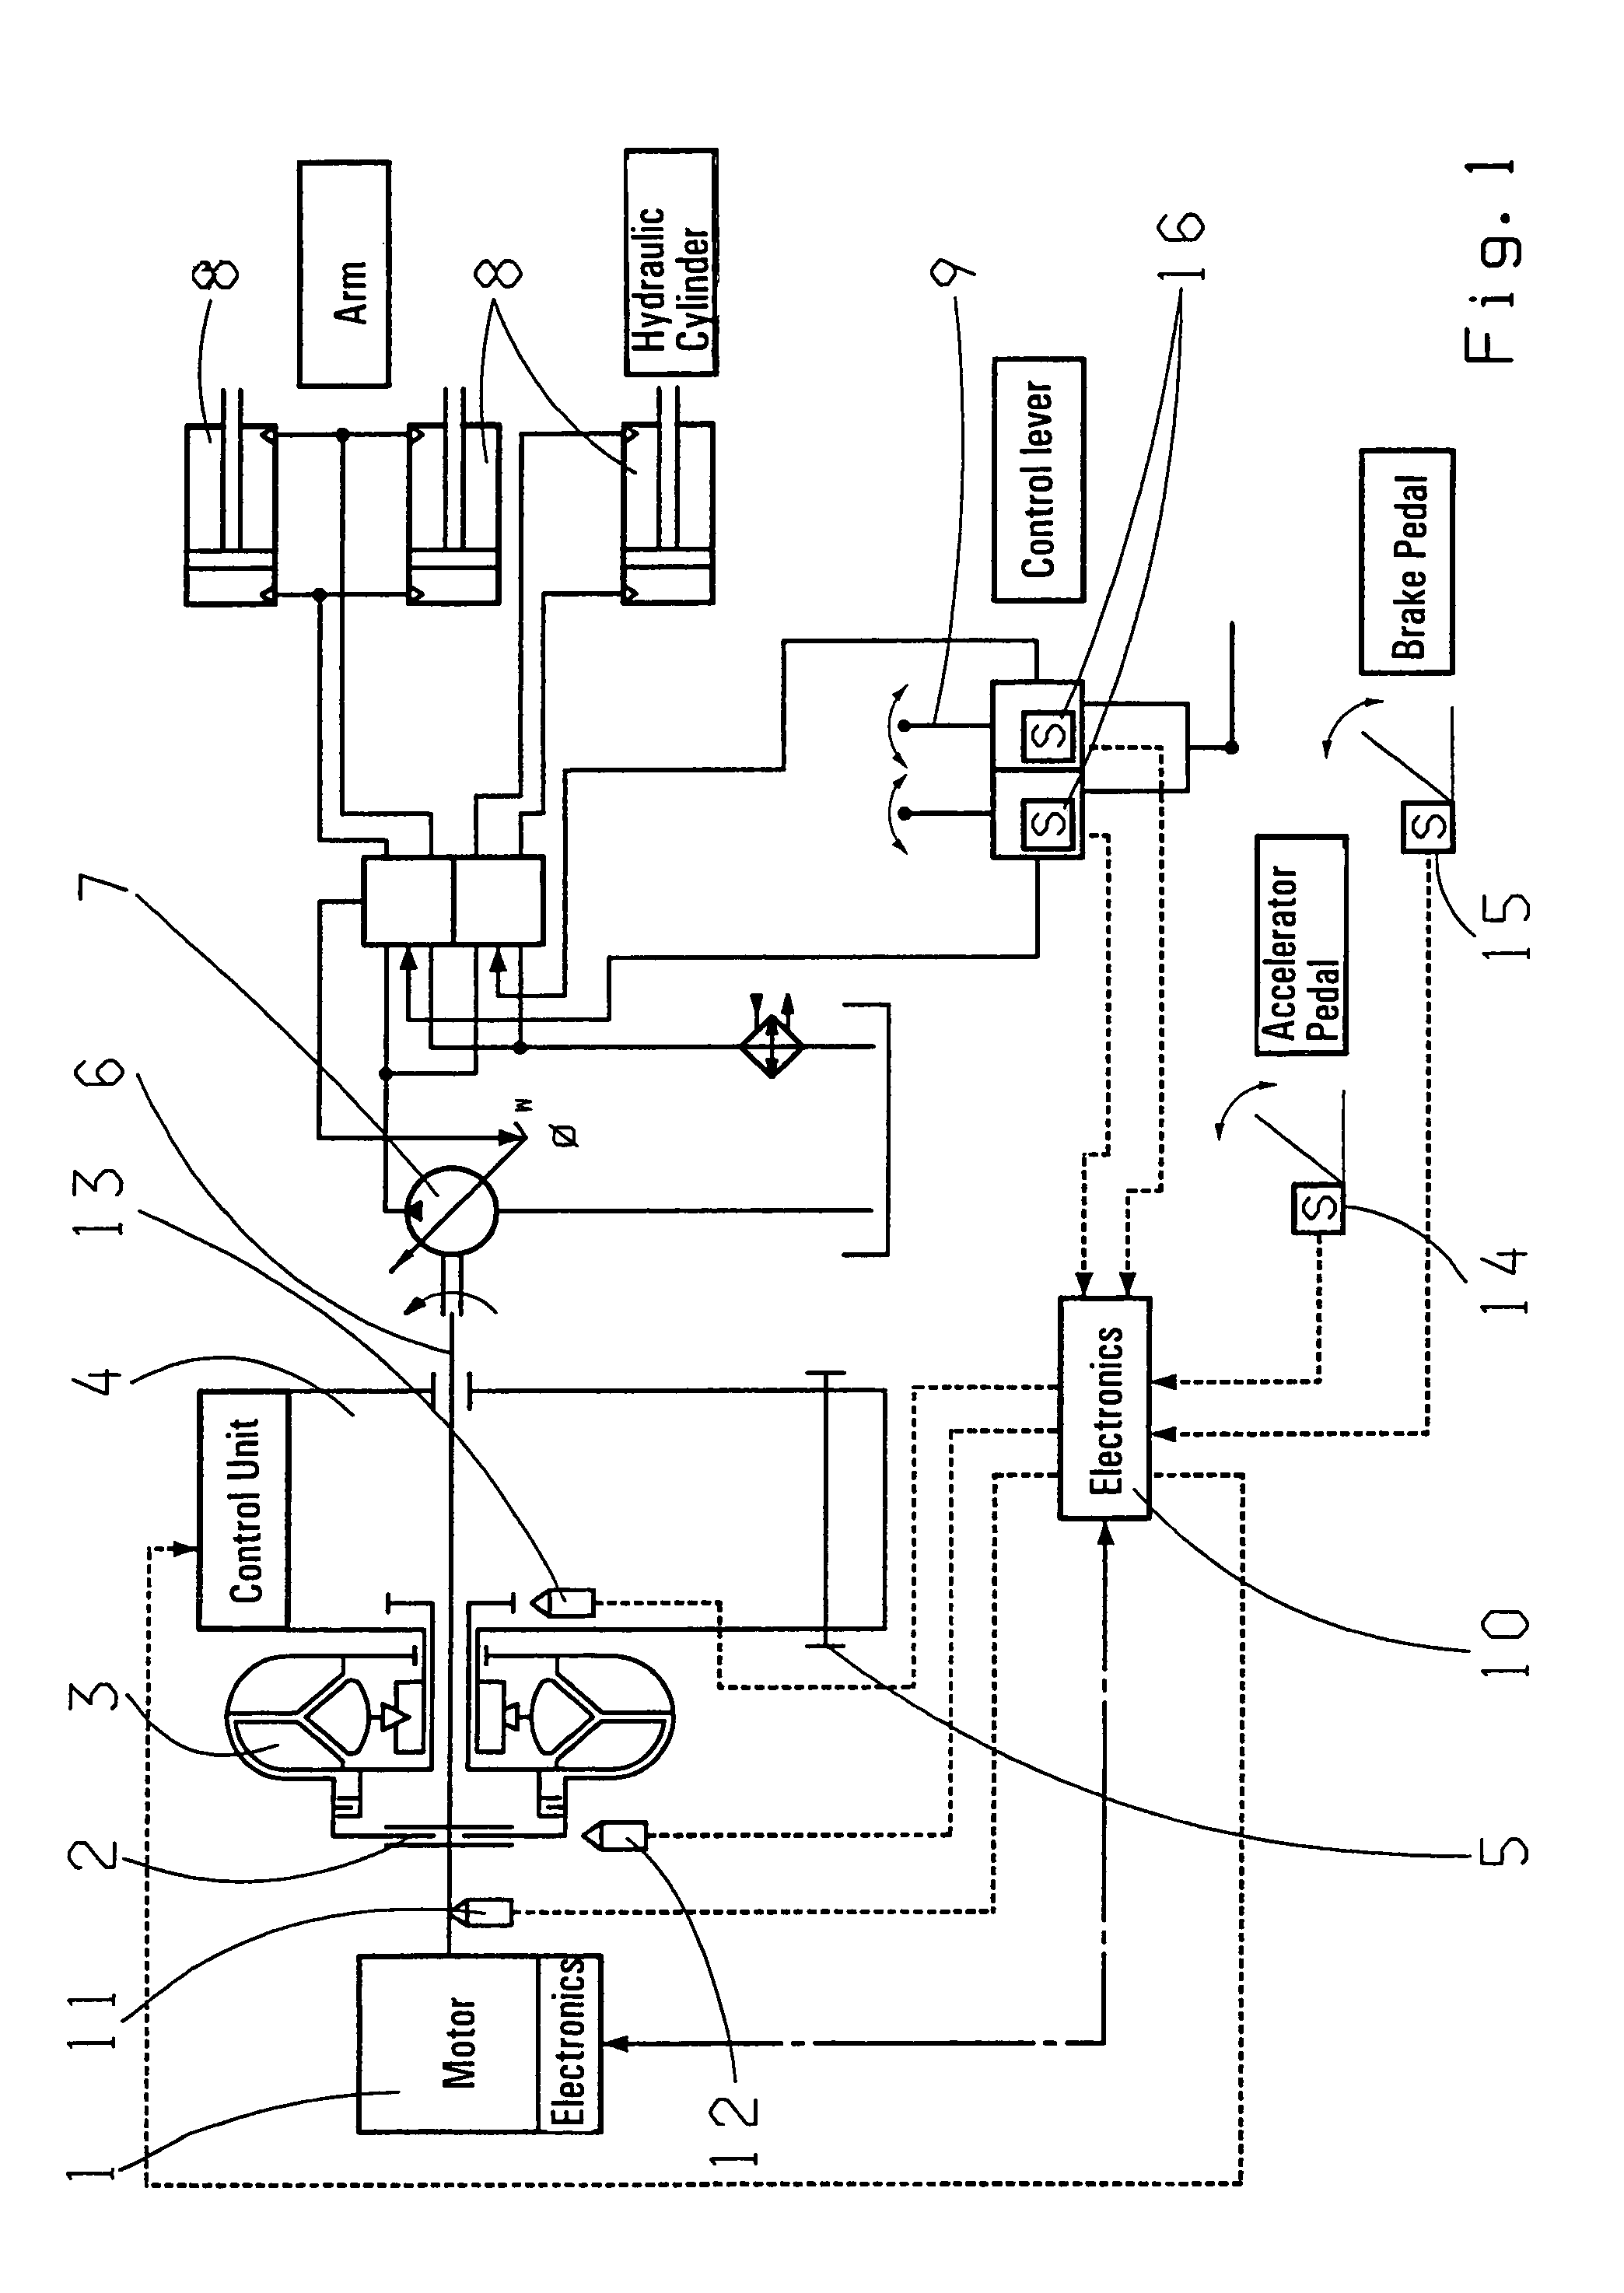 Power train for a mobile vehicle